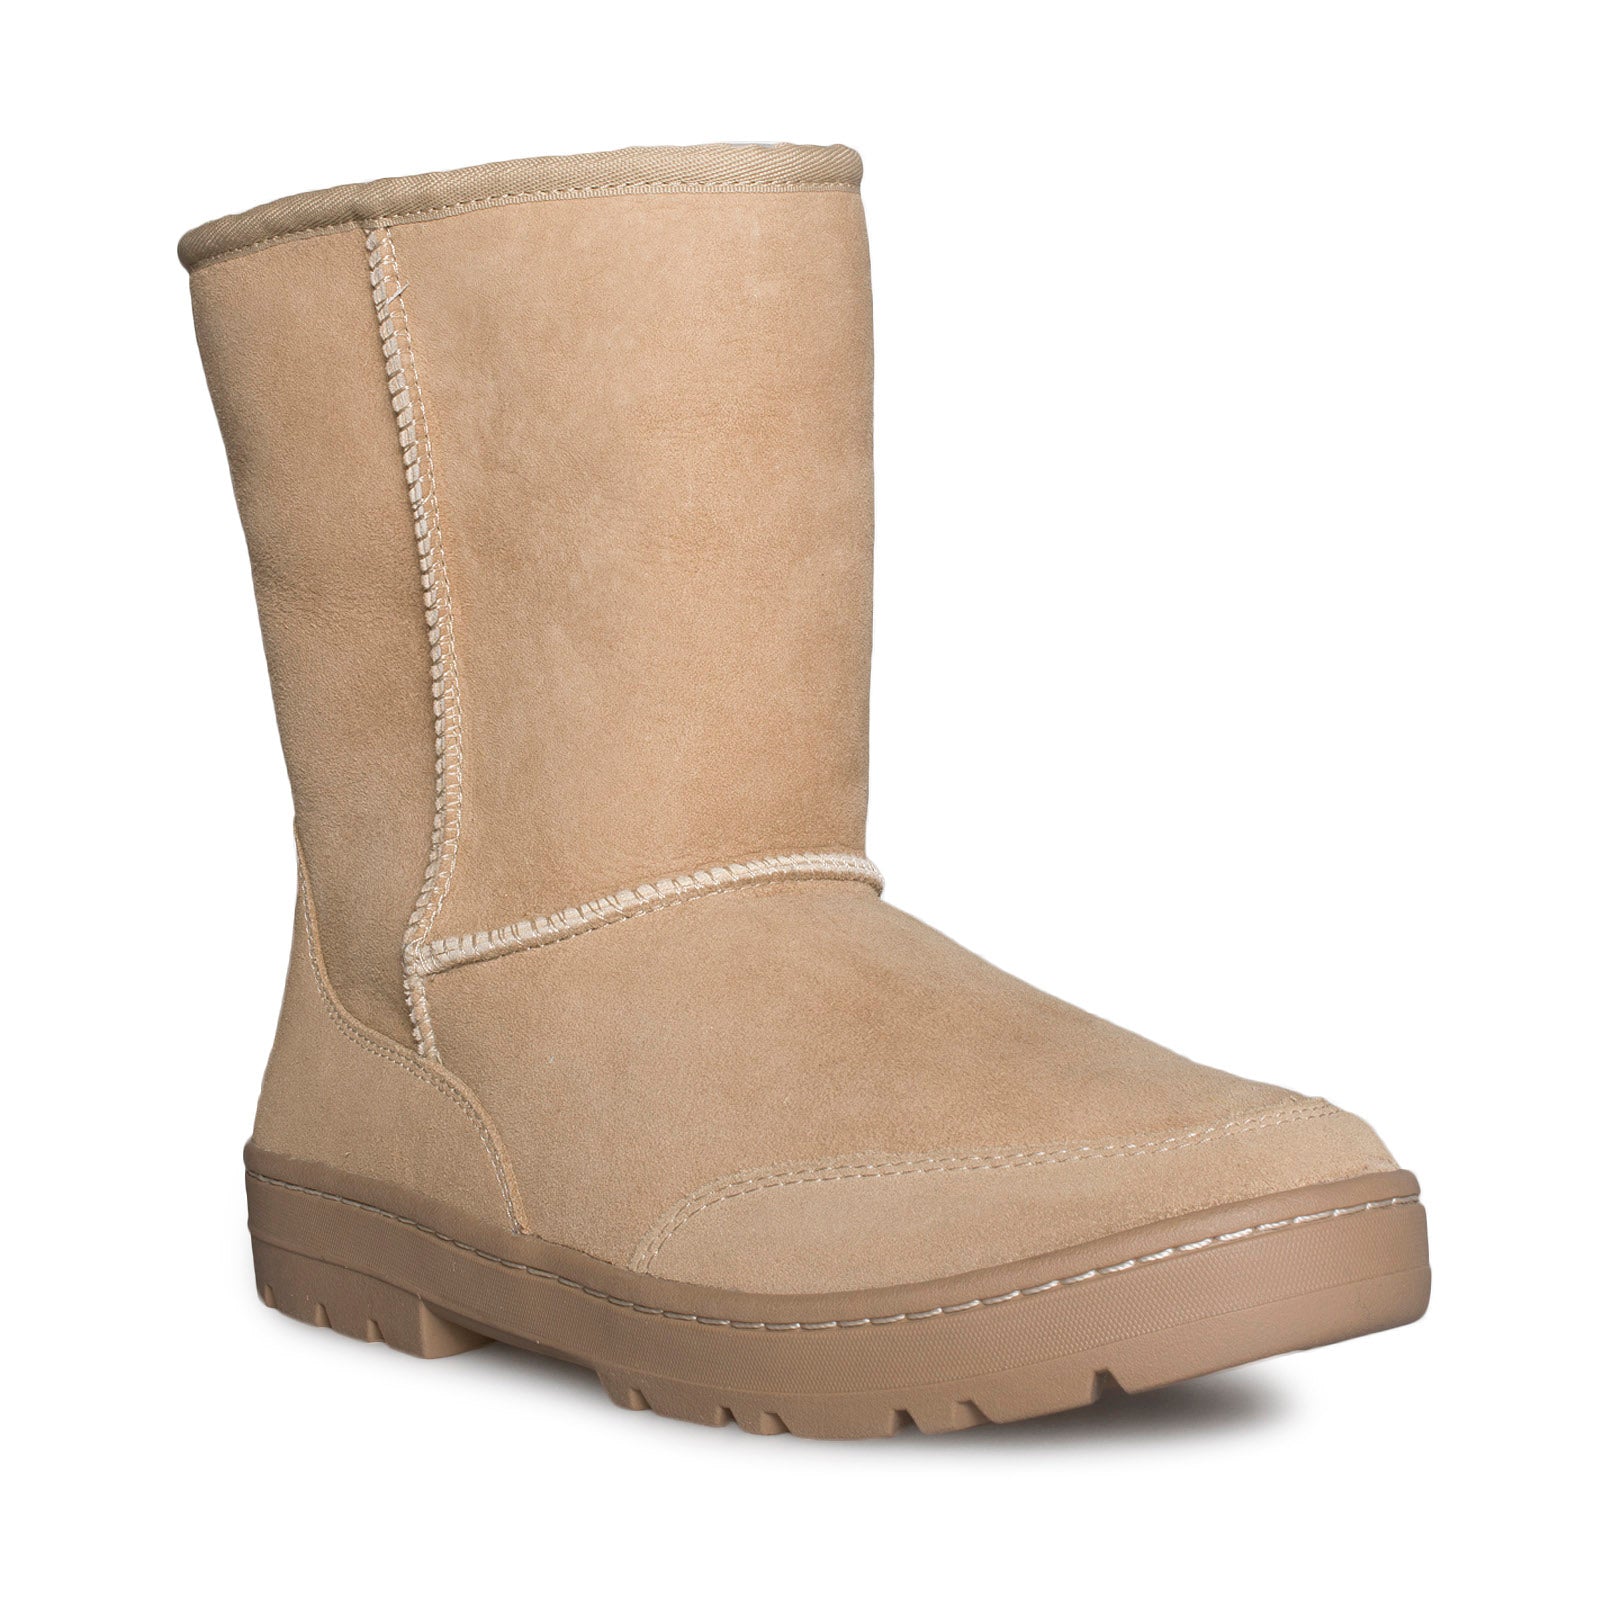 UGG Ultra Short Revival Sand Boots - Women's - MyCozyBoots